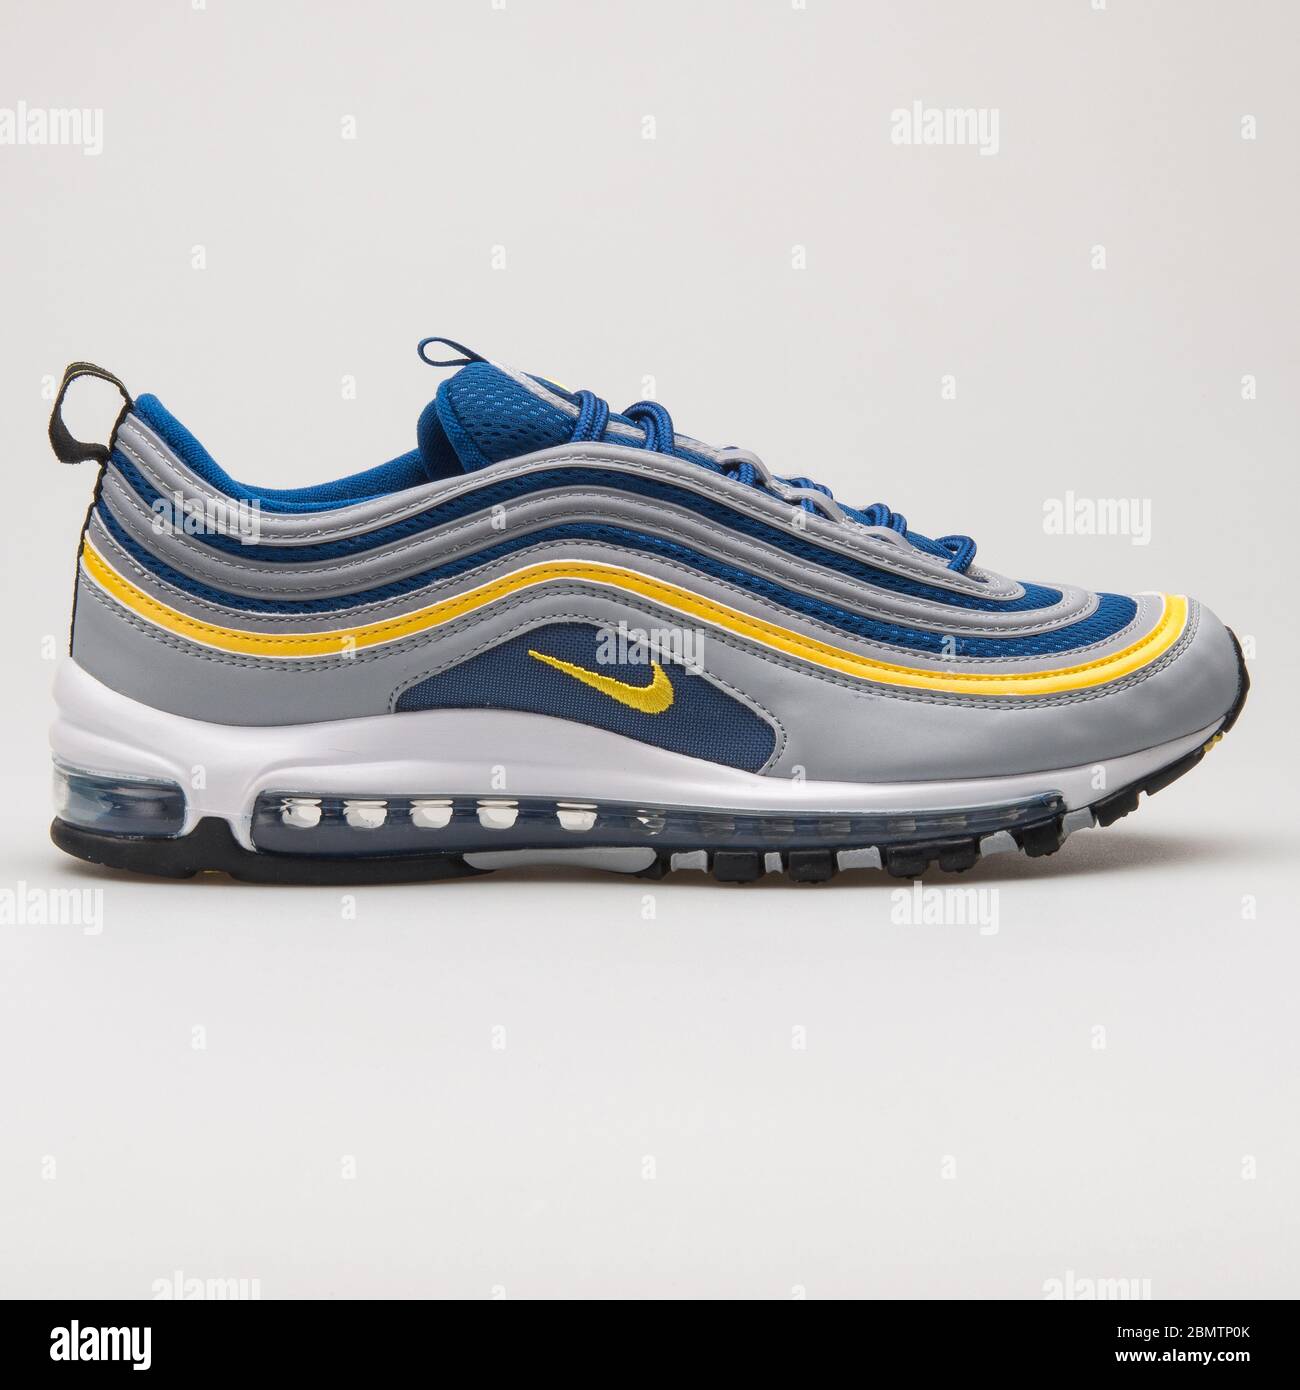 VIENNA, AUSTRIA - FEBRUARY 19, 2018: Nike Air Max 97 grey, blue and yellow  sneaker on white background Stock Photo - Alamy